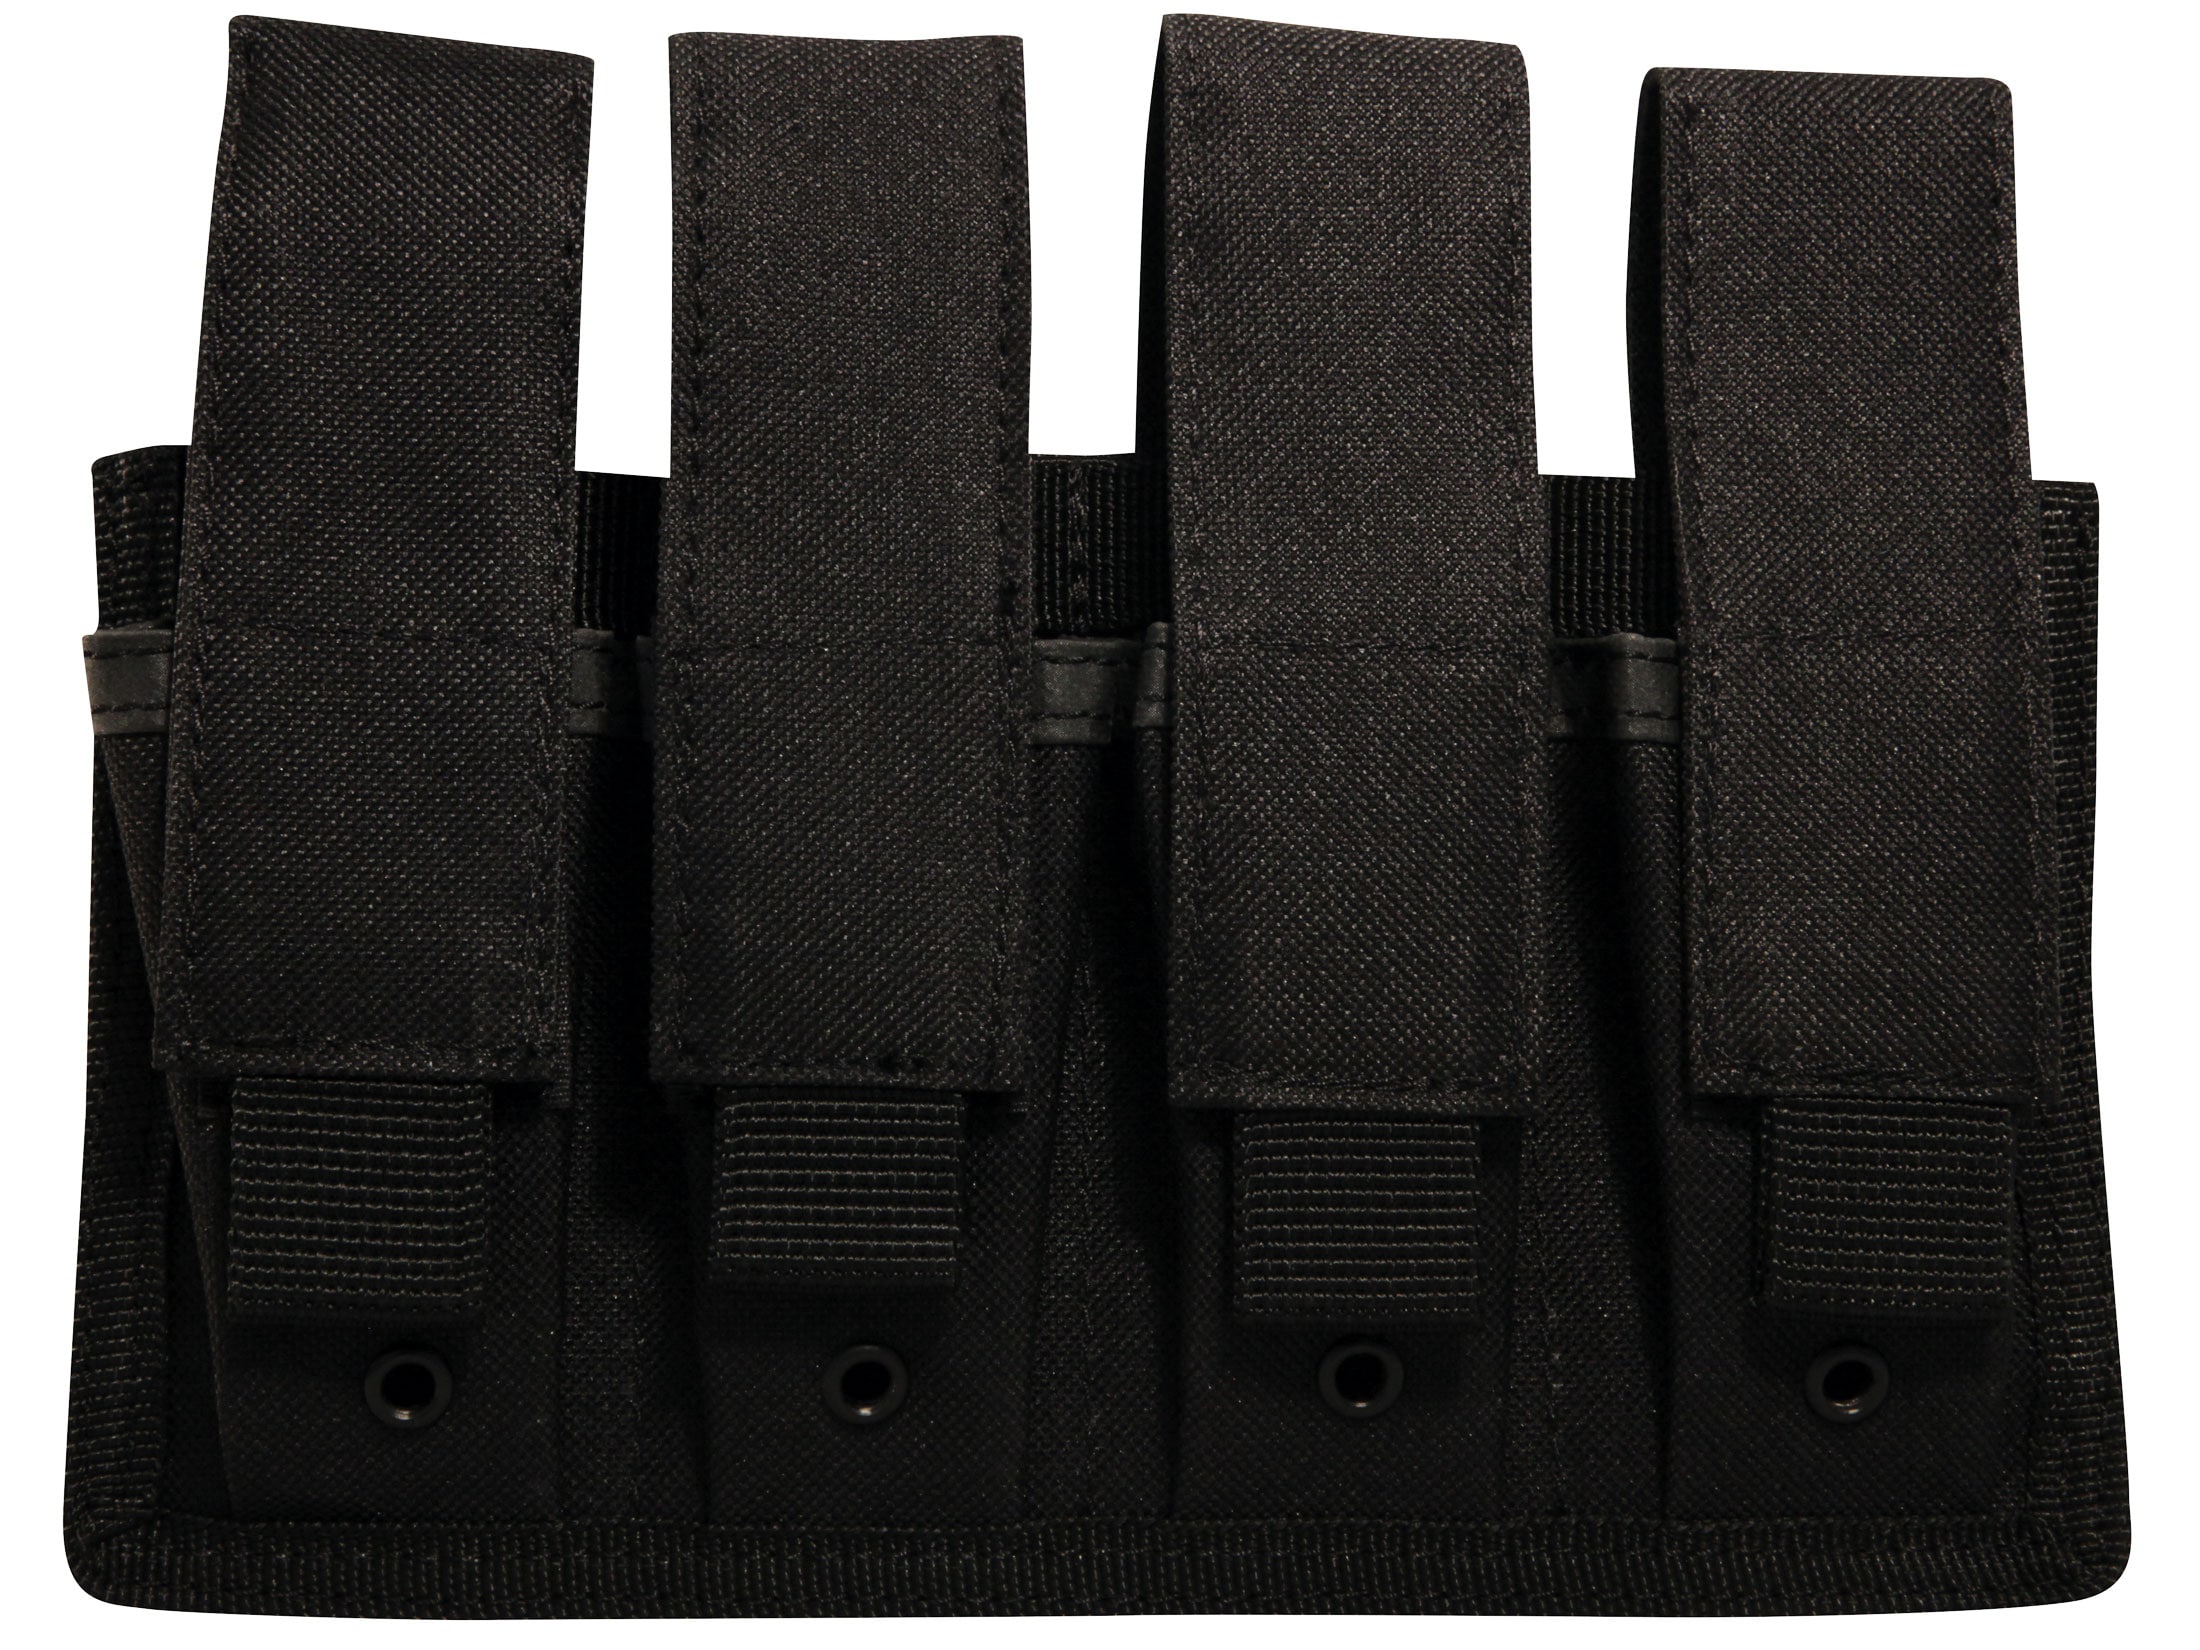 Details about    Universal Tactical Molle Double Magazine Pouch Holster Pistol Mag Holder Black 